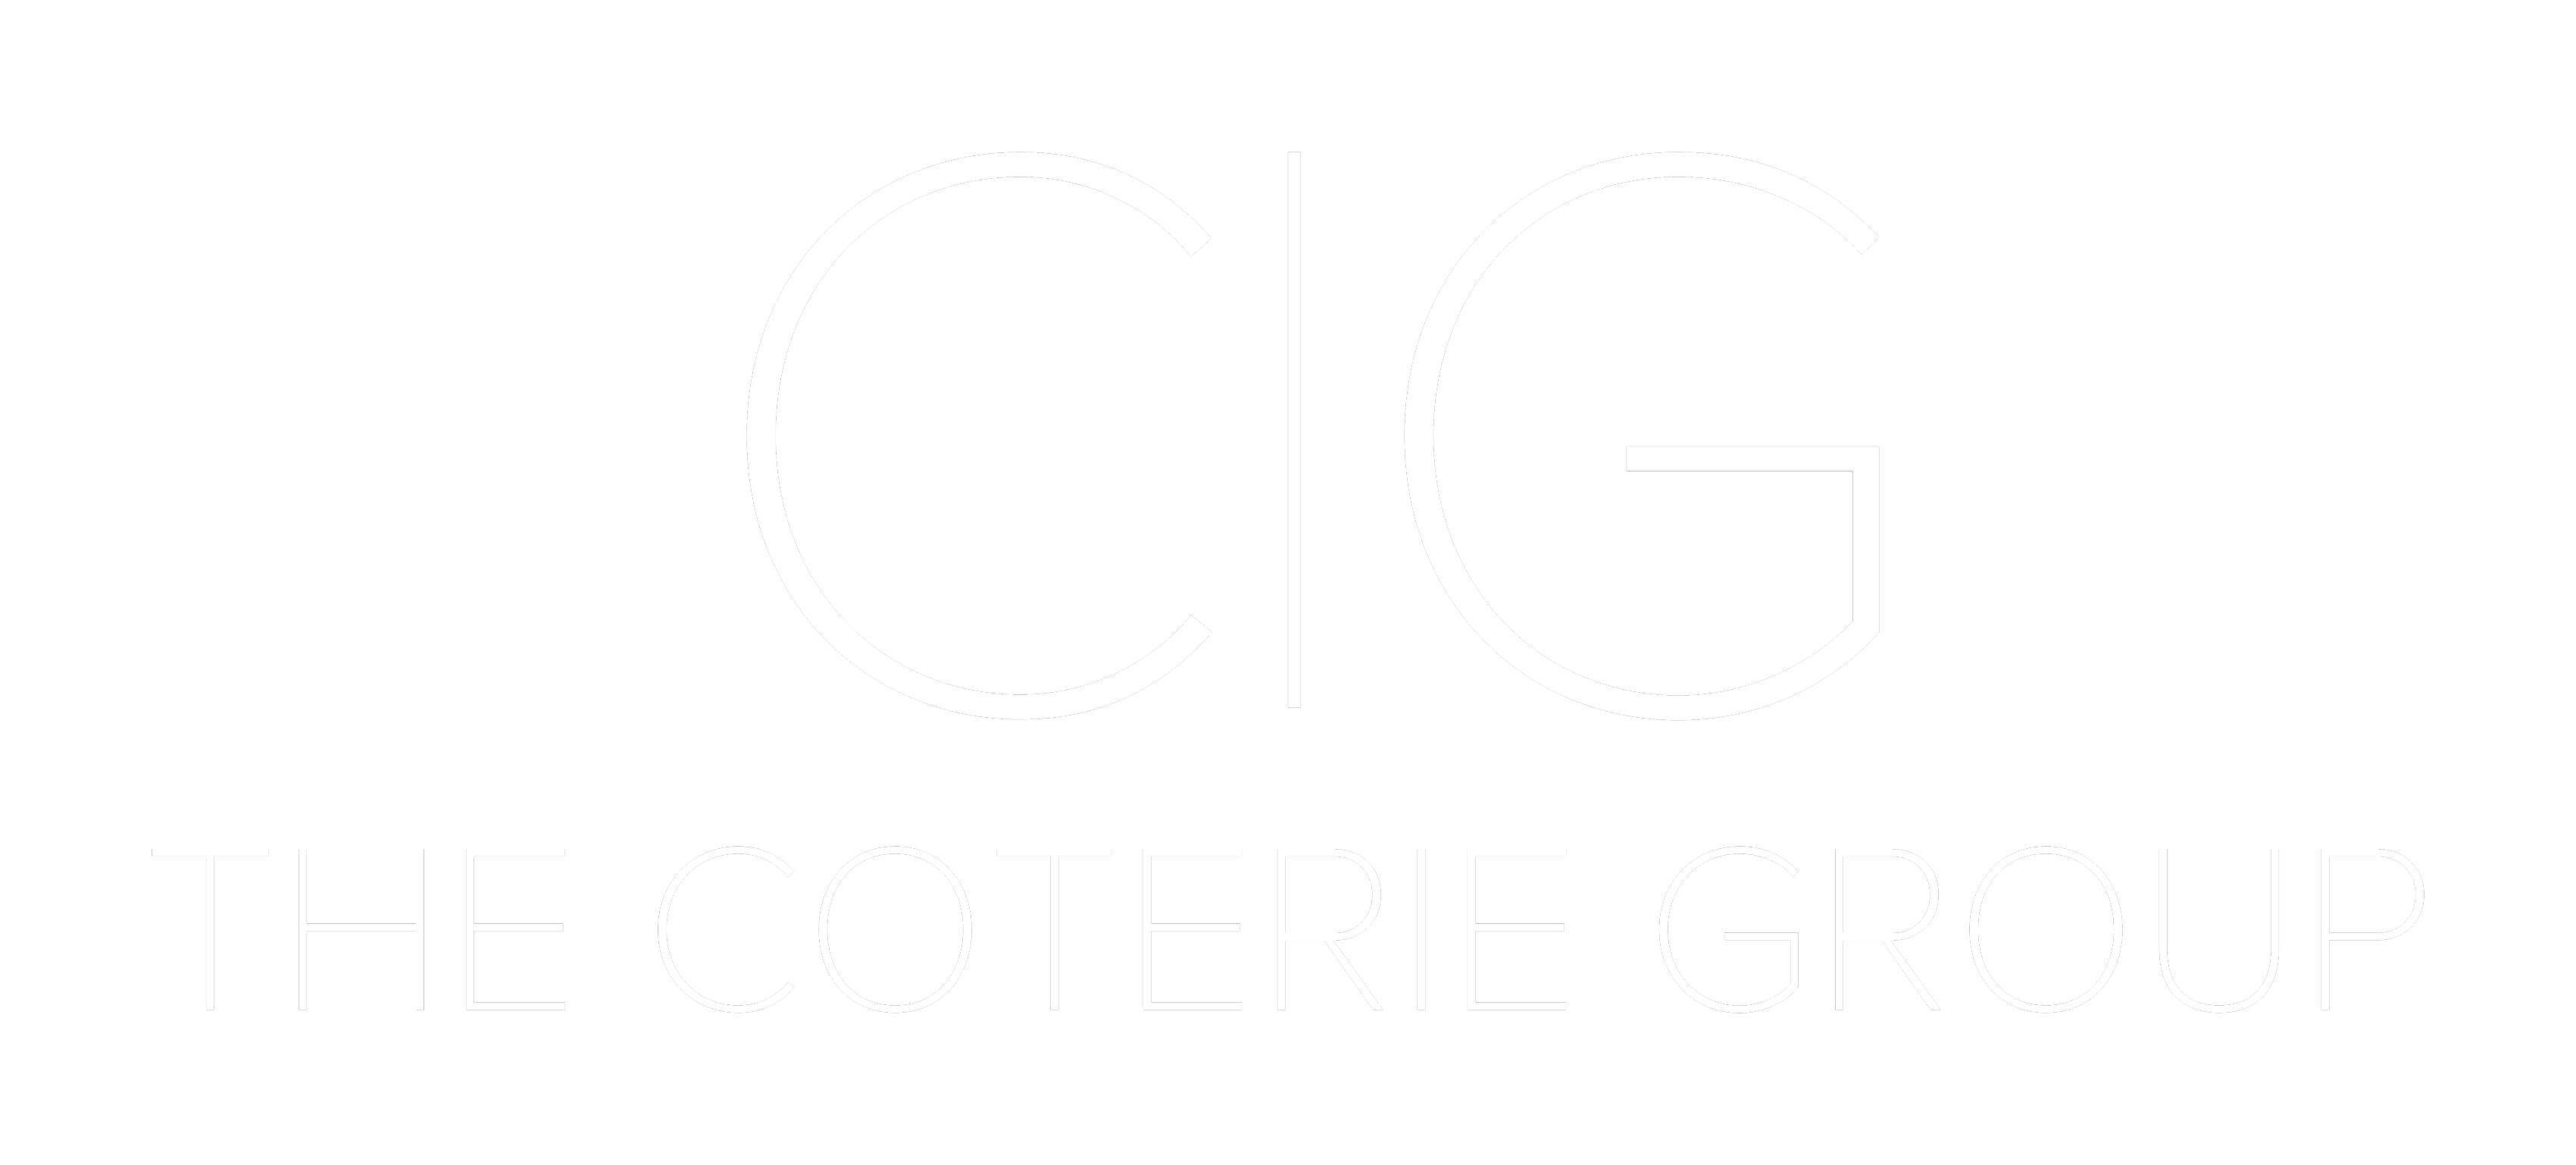 The Coterie Group Logo